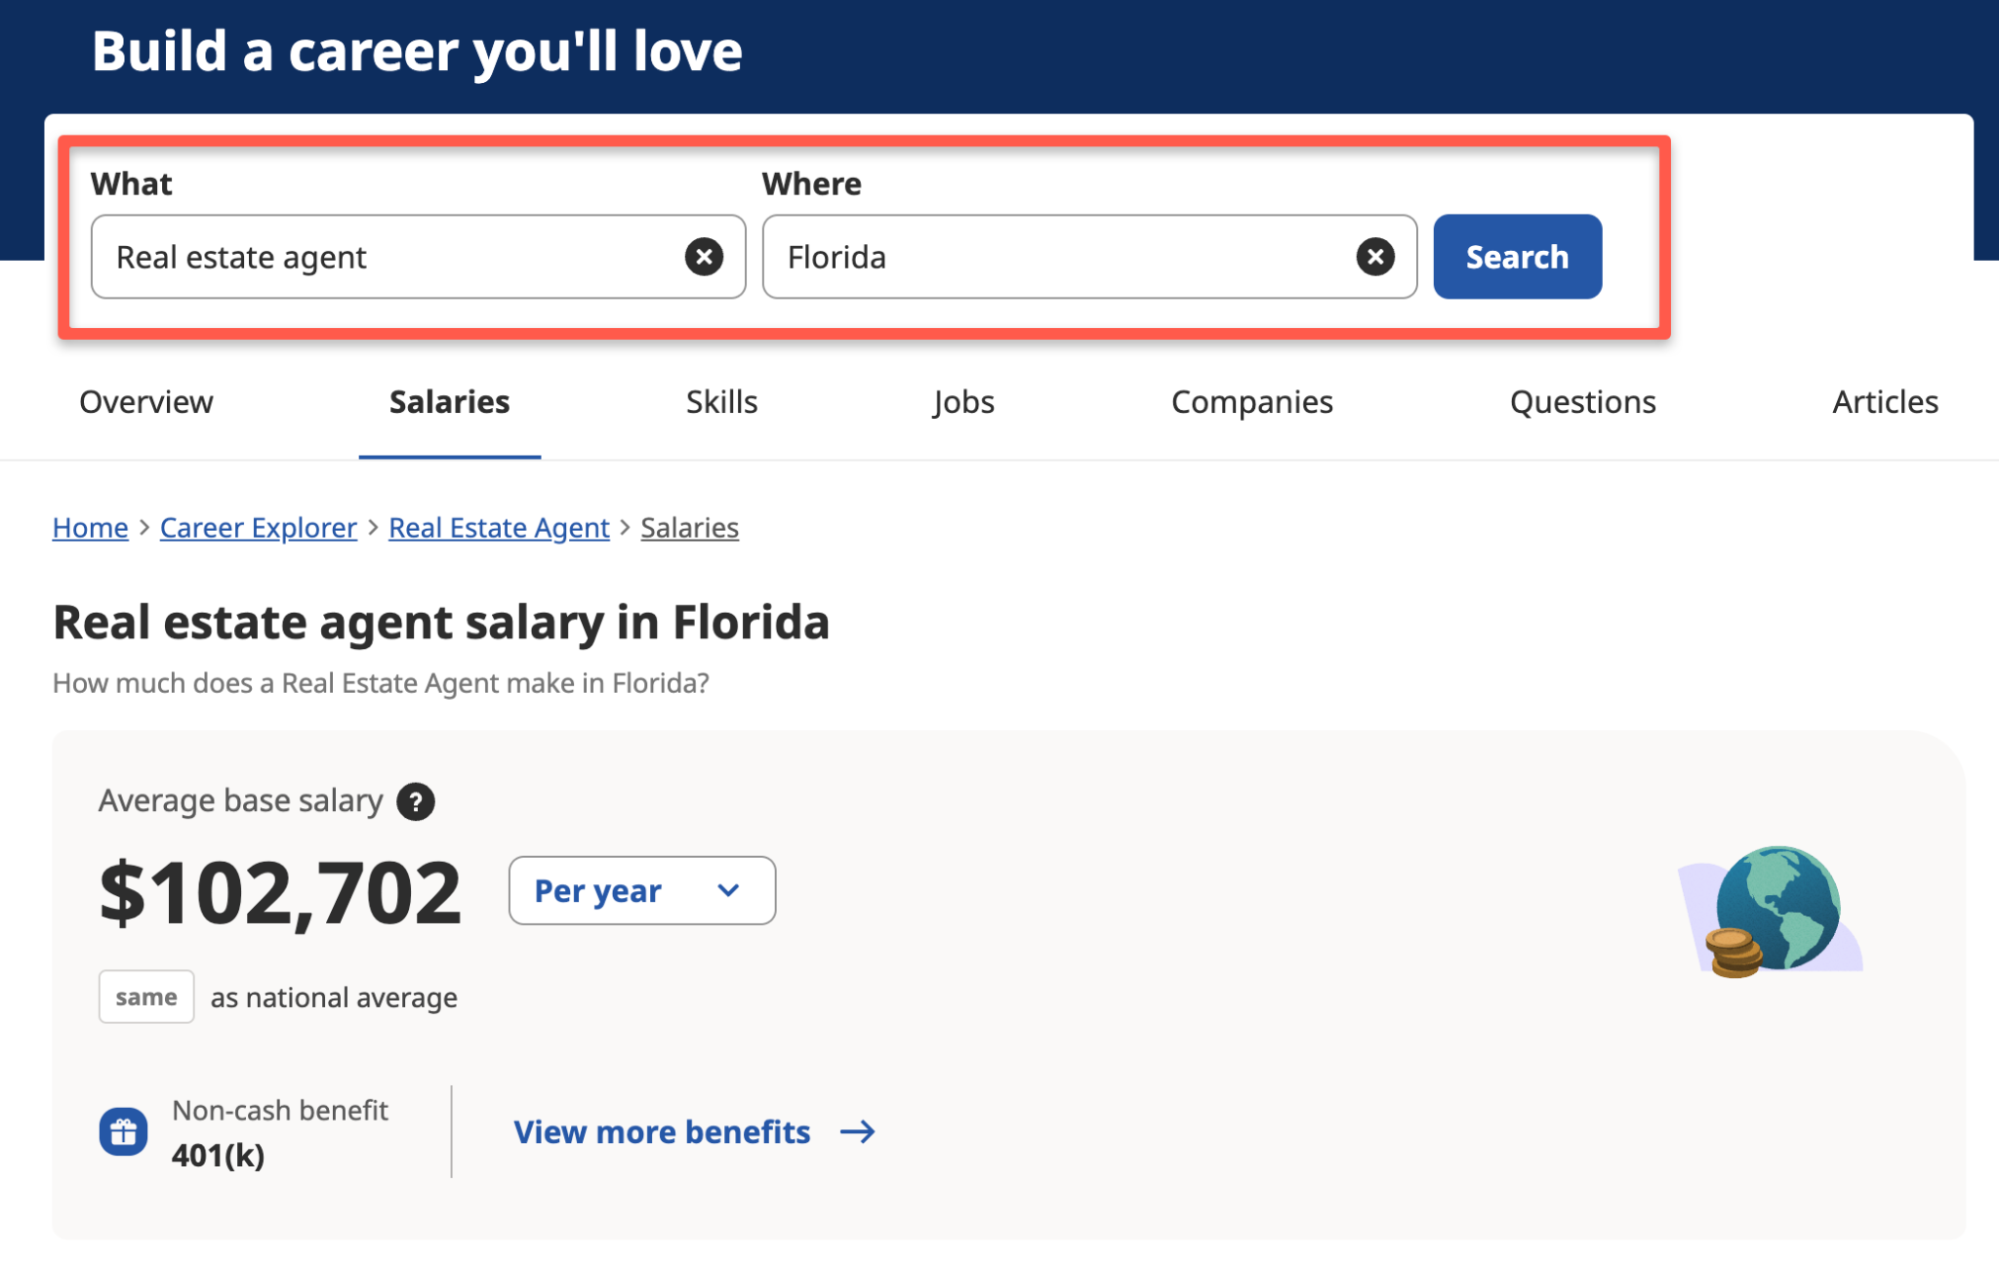 Salary information listed on Indeed.com for real estate associates in Florida.